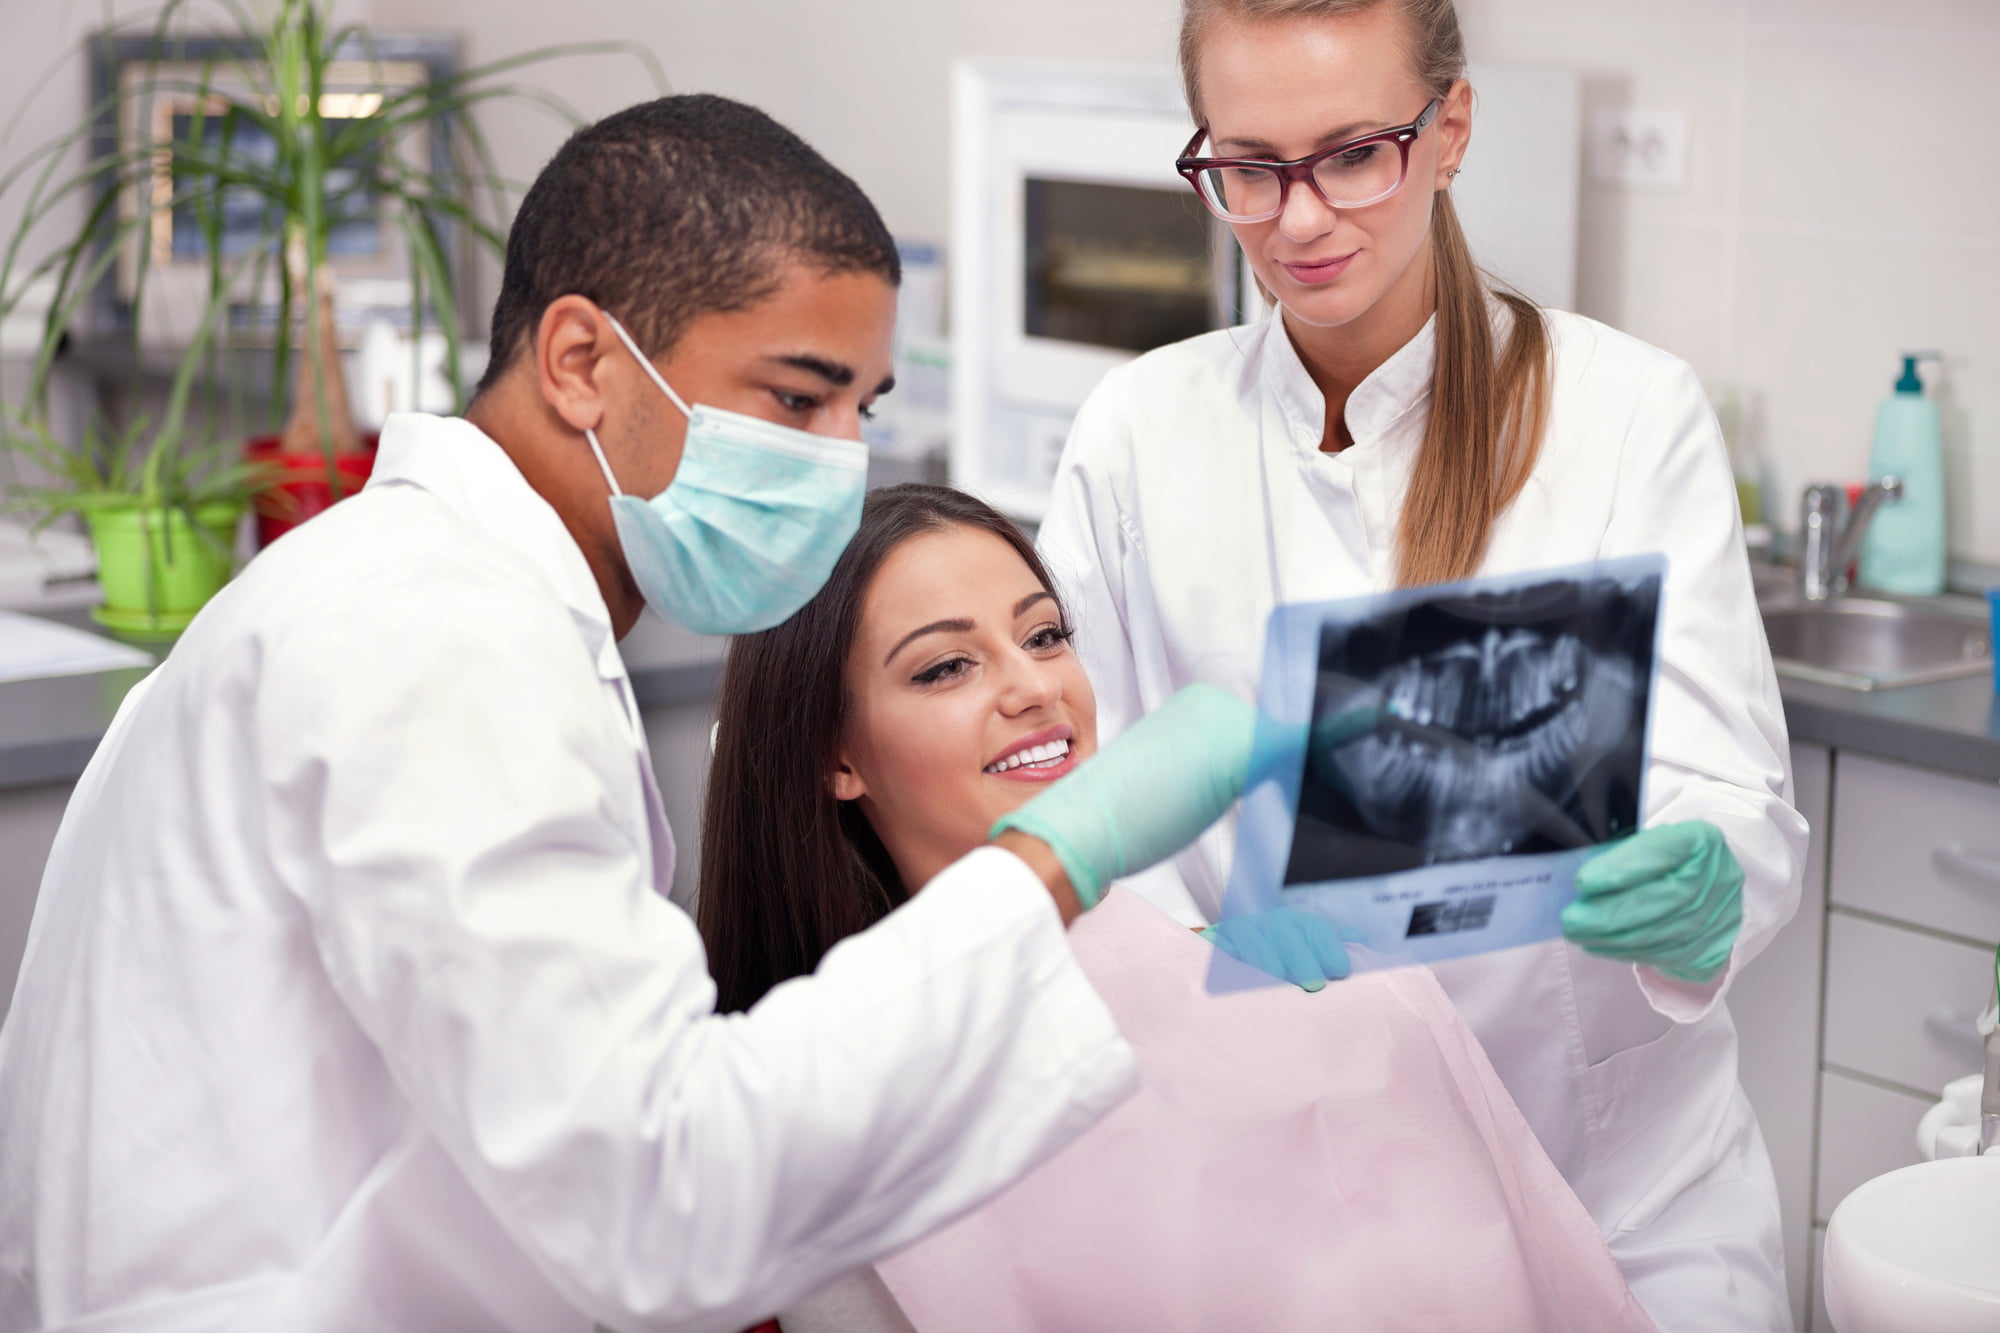 Are you wondering what your dentist can spot in a dental x-ray? Learn here what a dental x-ray can reveal about your teeth and mouth.